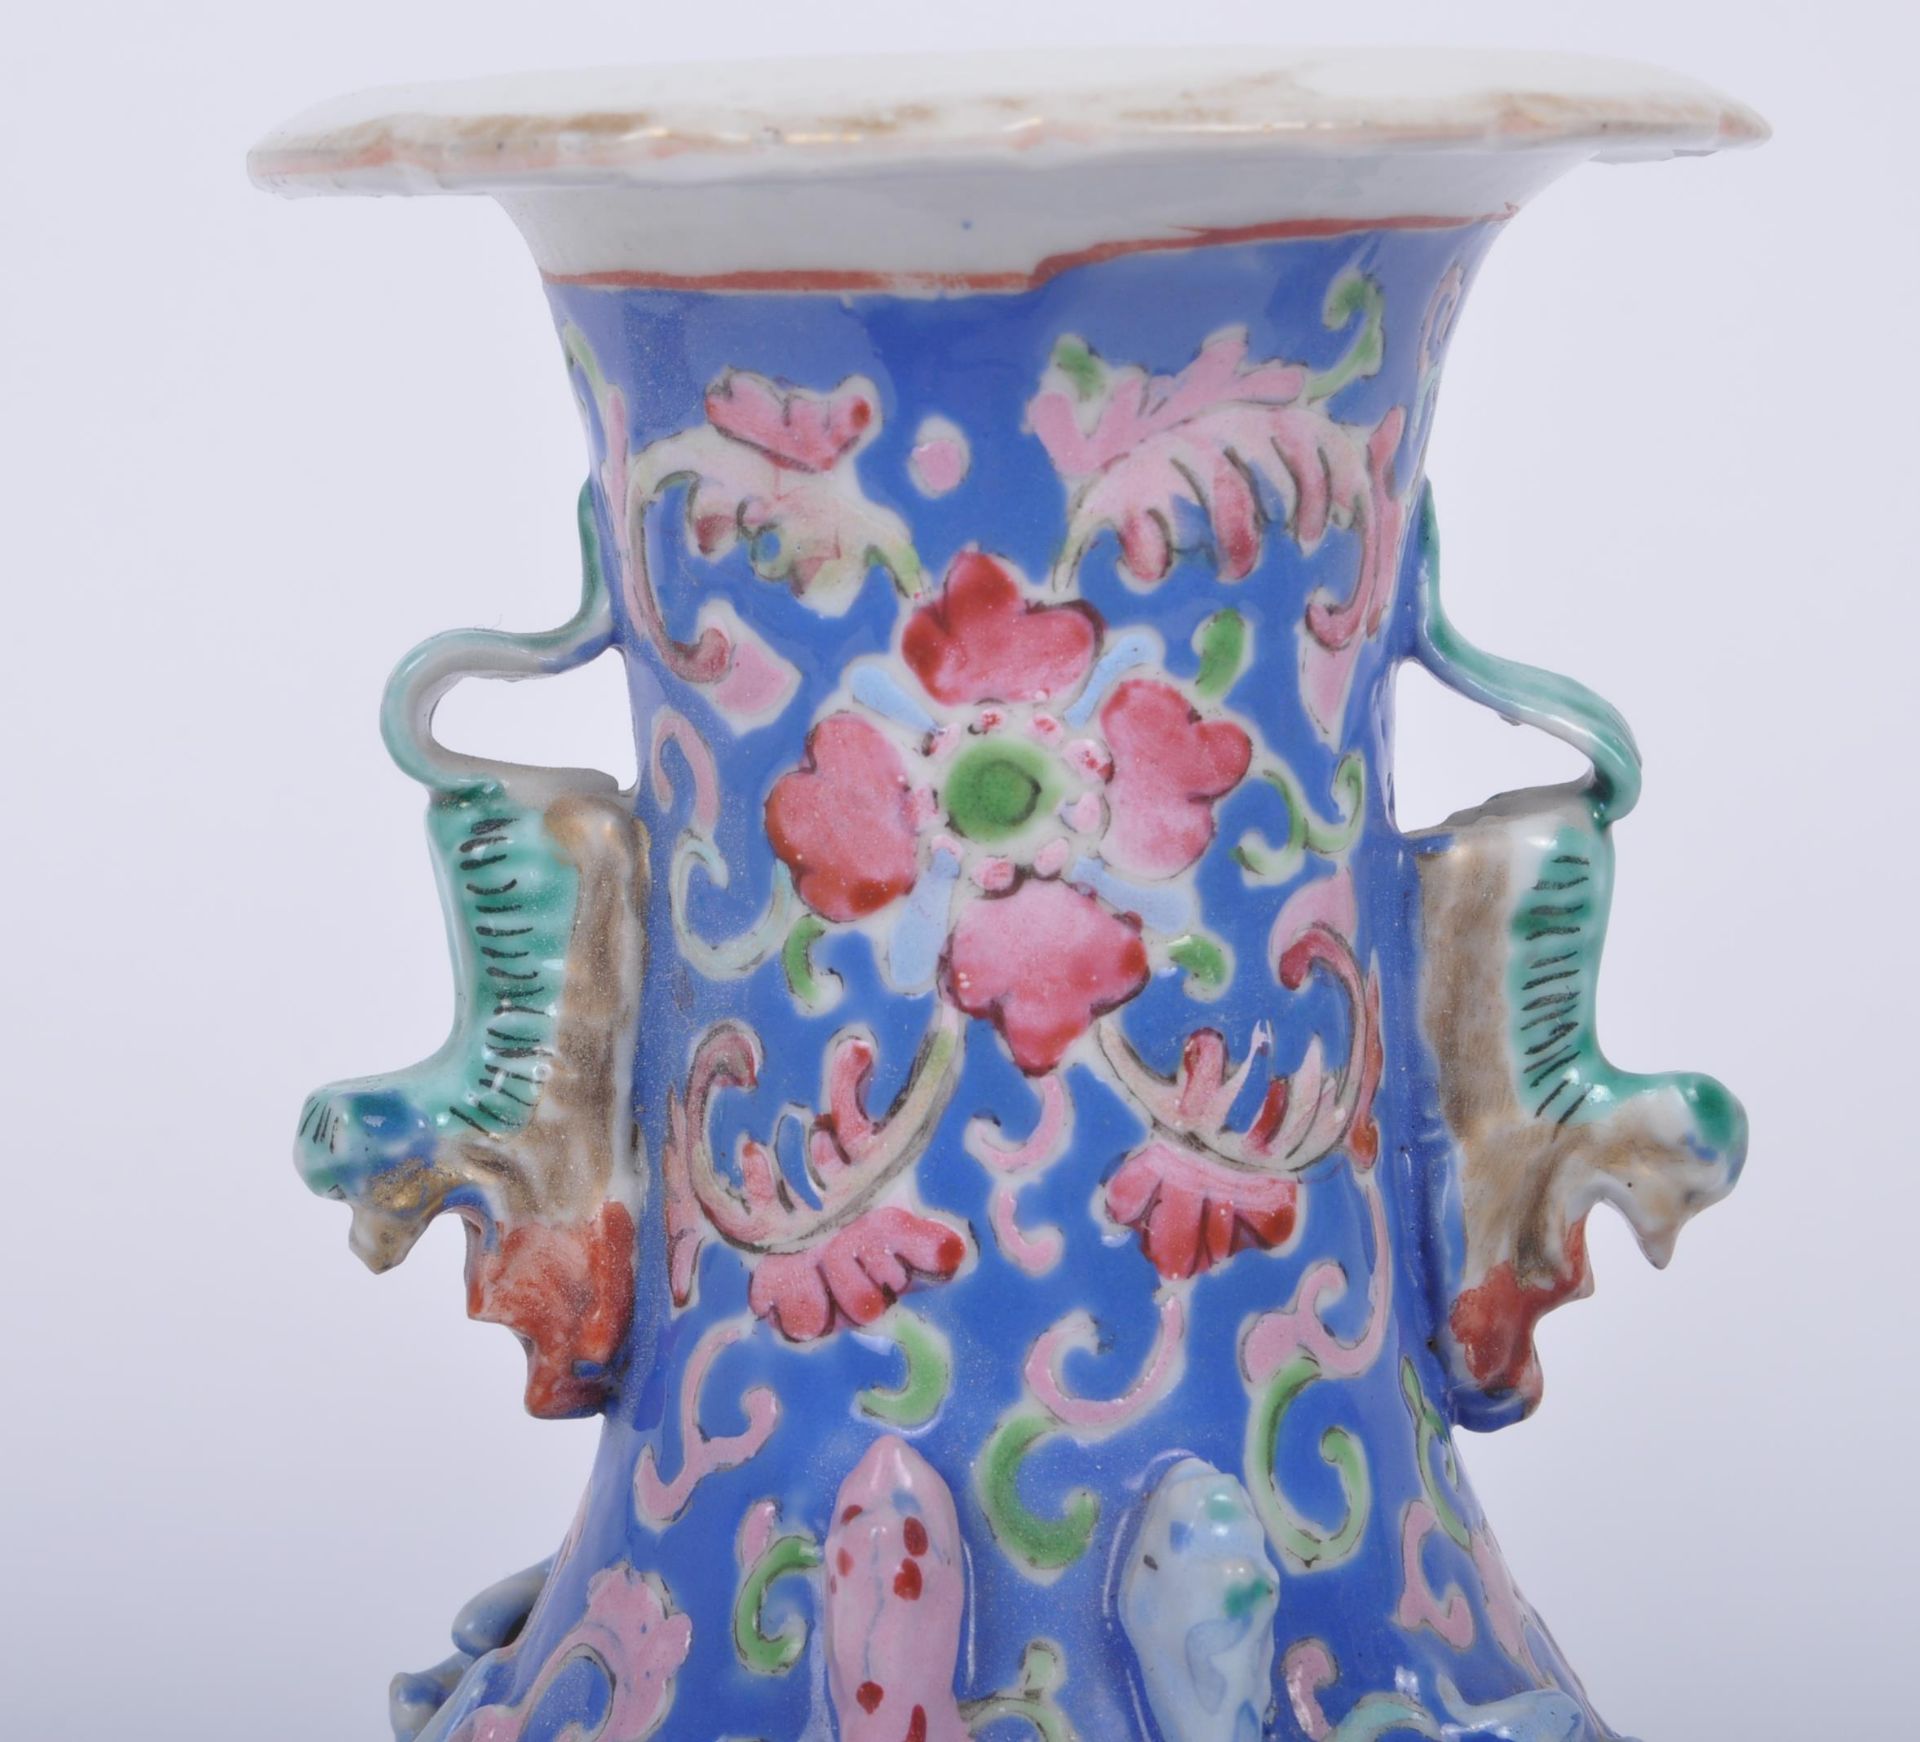 PAIR OF LATE 19TH CENTURY CHINESE CERAMIC FAMILLE ROSE VASES - Image 4 of 6